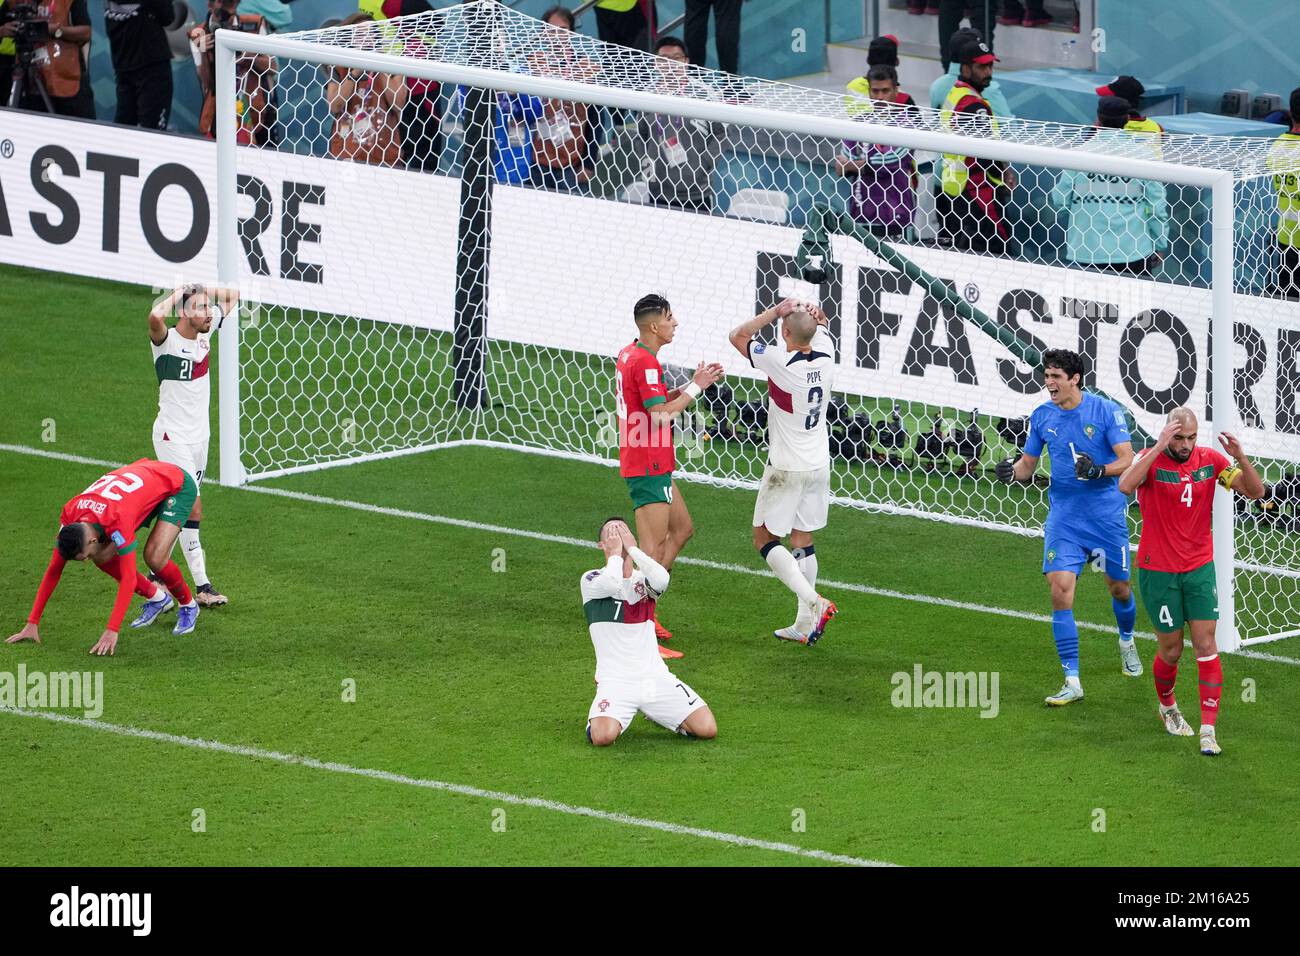 Doha, Qatar. 10th Dec, 2022. Cristiano Ronaldo (3rd L) and Pepe (3rd R) of Portugal react after missing a goal during the Quarterfinal between Morocco and Portugal of the 2022 FIFA World Cup at Al Thumama Stadium in Doha, Qatar, Dec. 10, 2022. Credit: Zheng Huansong/Xinhua/Alamy Live News Stock Photo